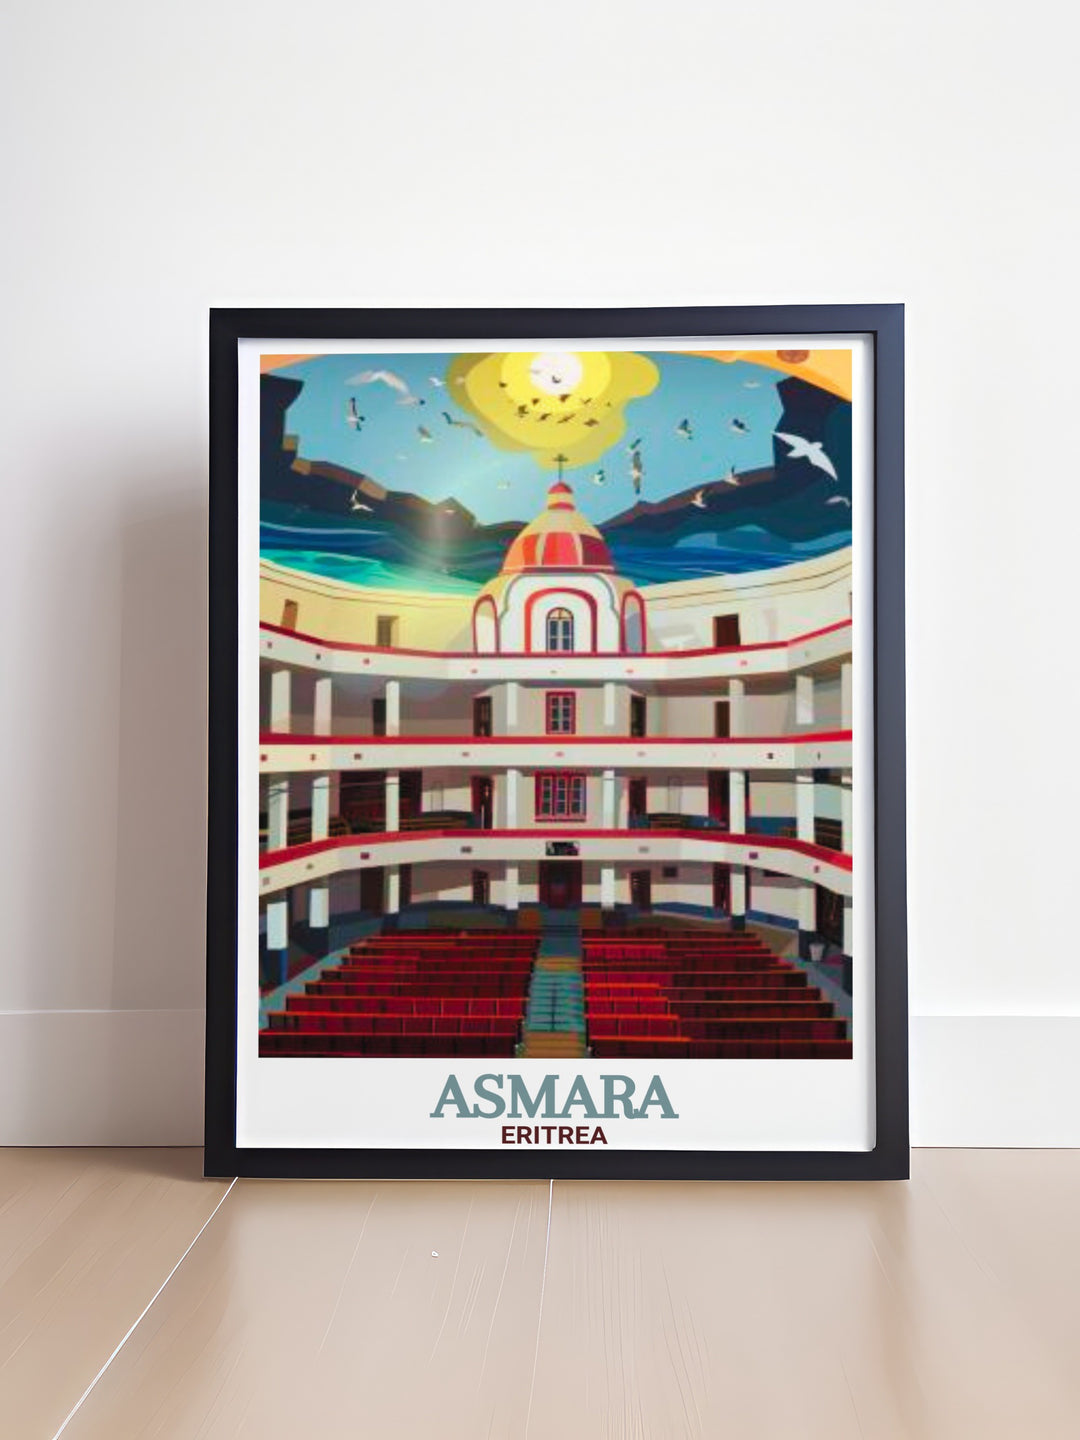 Elegant Asmara Opera House print in vintage style, ideal for home decor and personalized gifts, displaying stunning architectural details and vibrant colors.